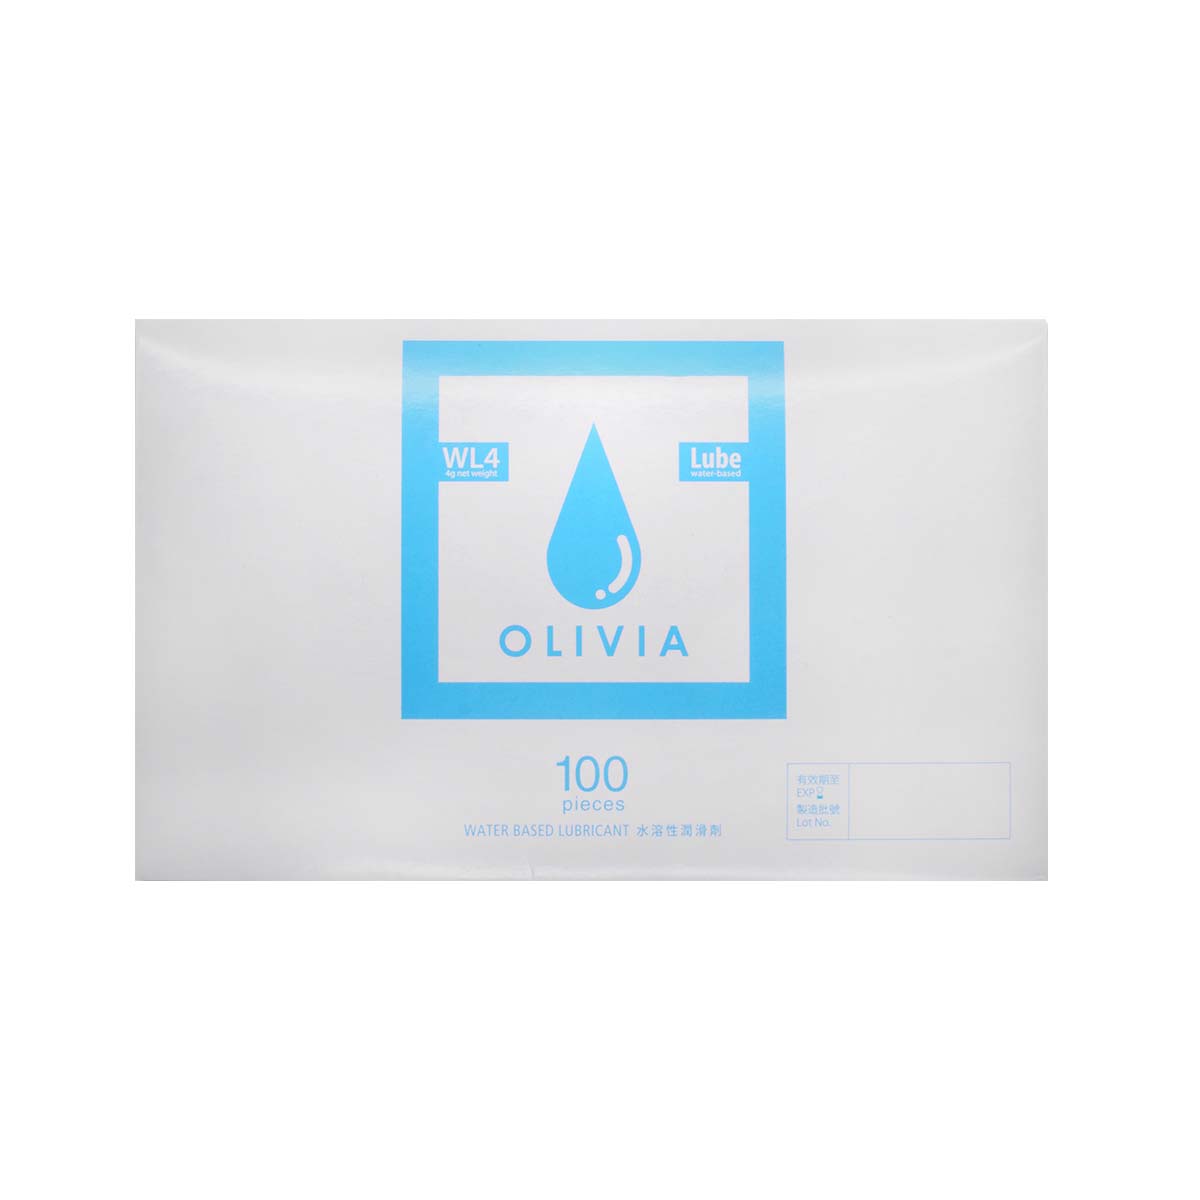 Olivia WL4 sachet 100 pieces Water-based Lubricant (Short Expiry)-p_2